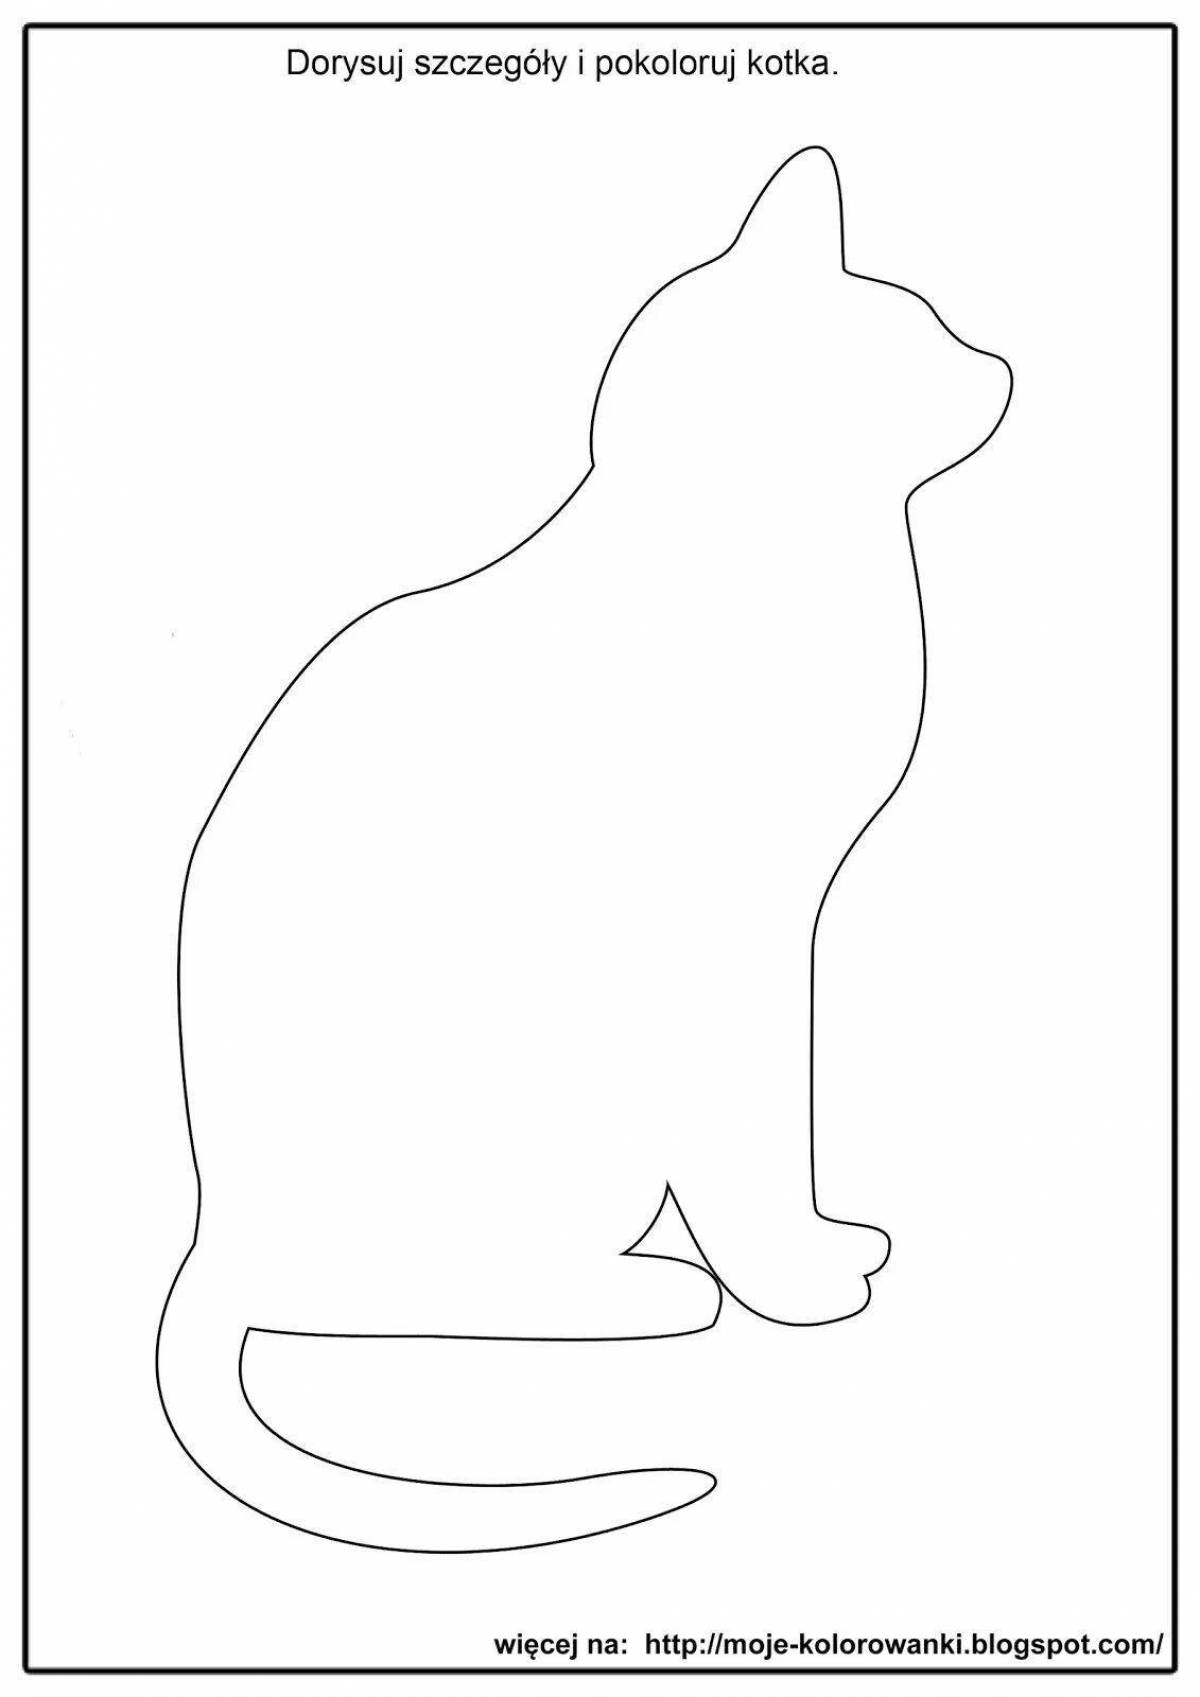 Adorable cat silhouette coloring book